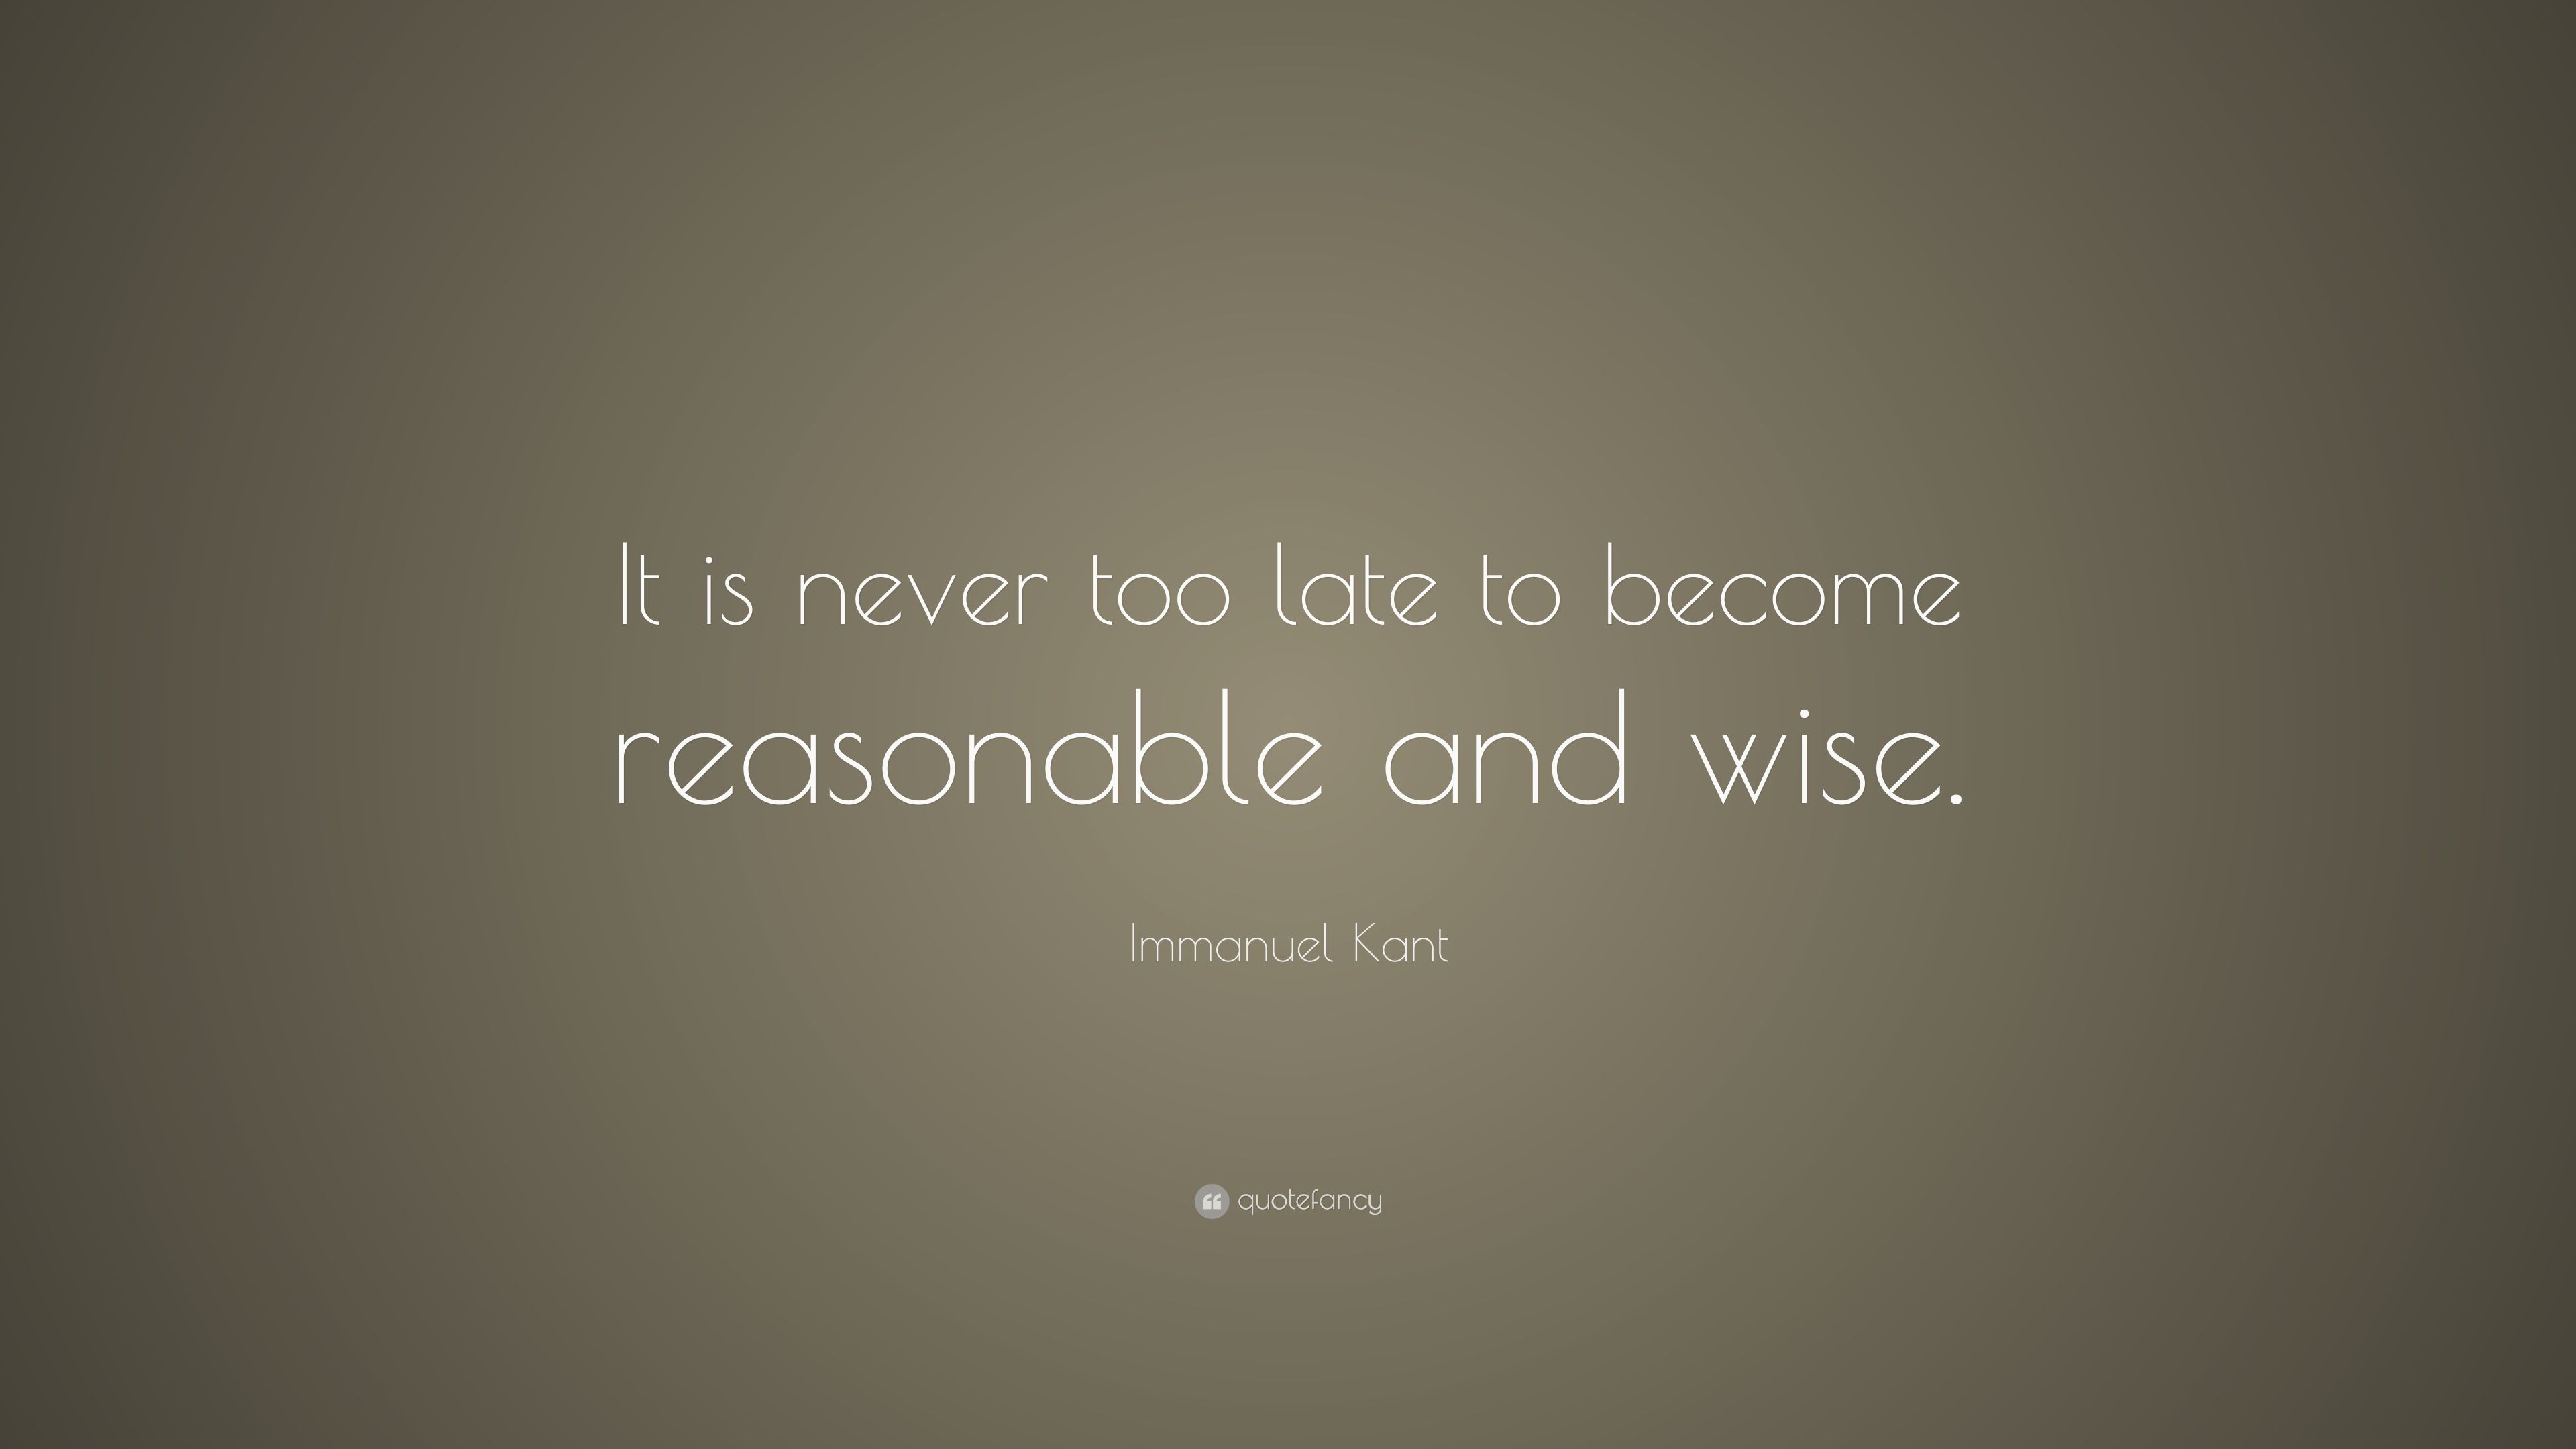 Immanuel Kant Quote: “It is never too late to become reasonable and wise.” (12 wallpaper)